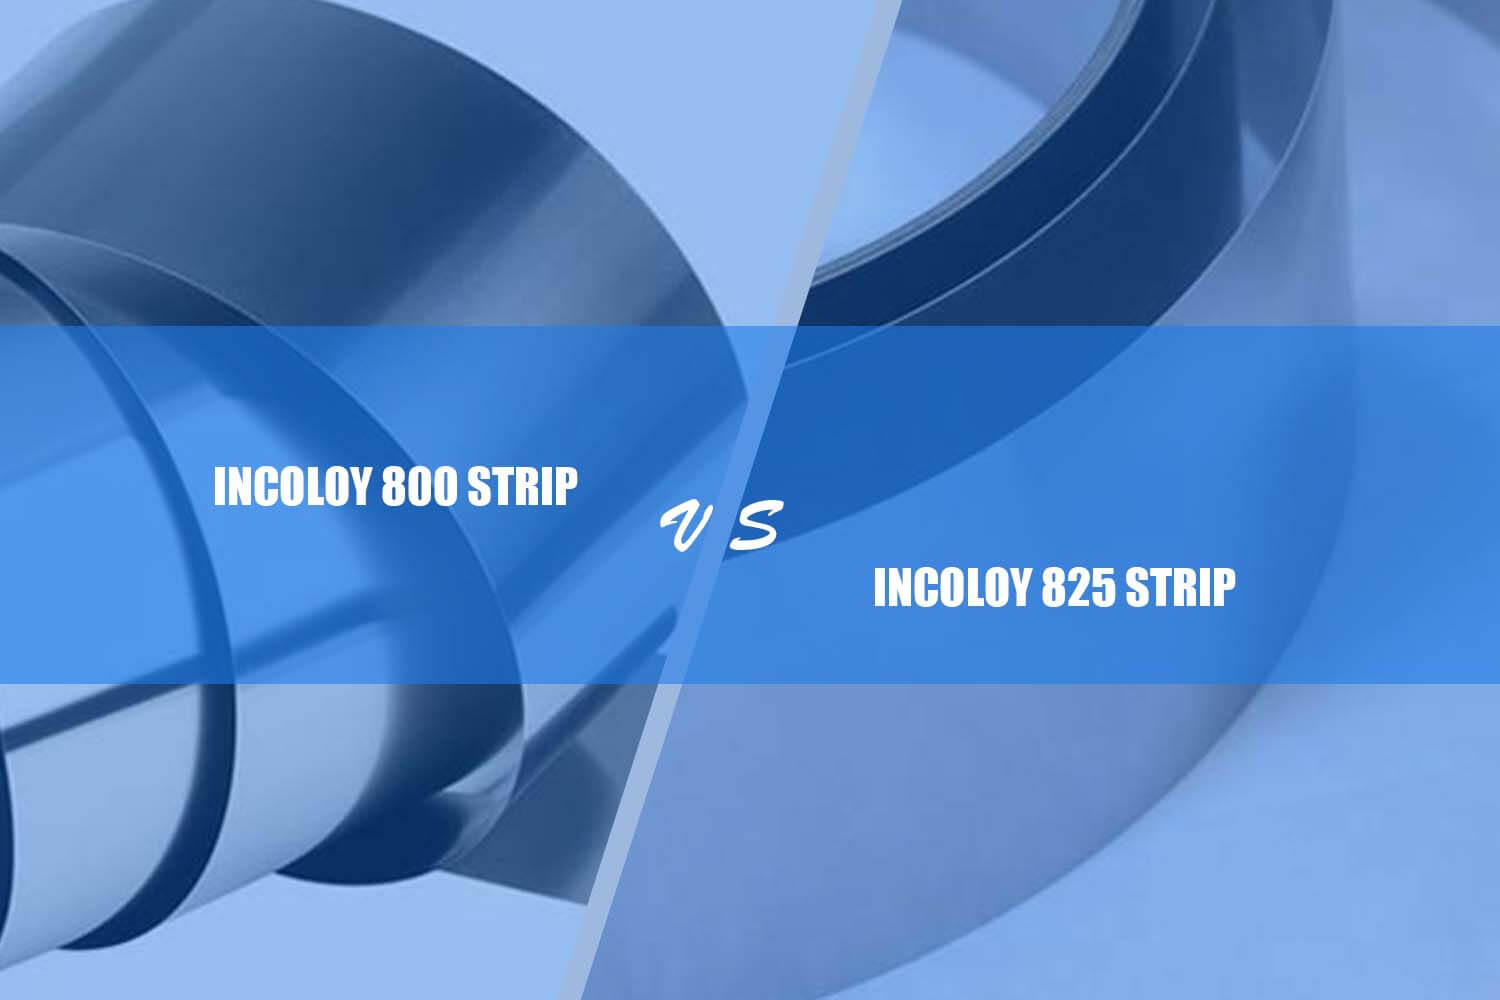 difference between incoloy 800 strip and incoloy 825 mengupas